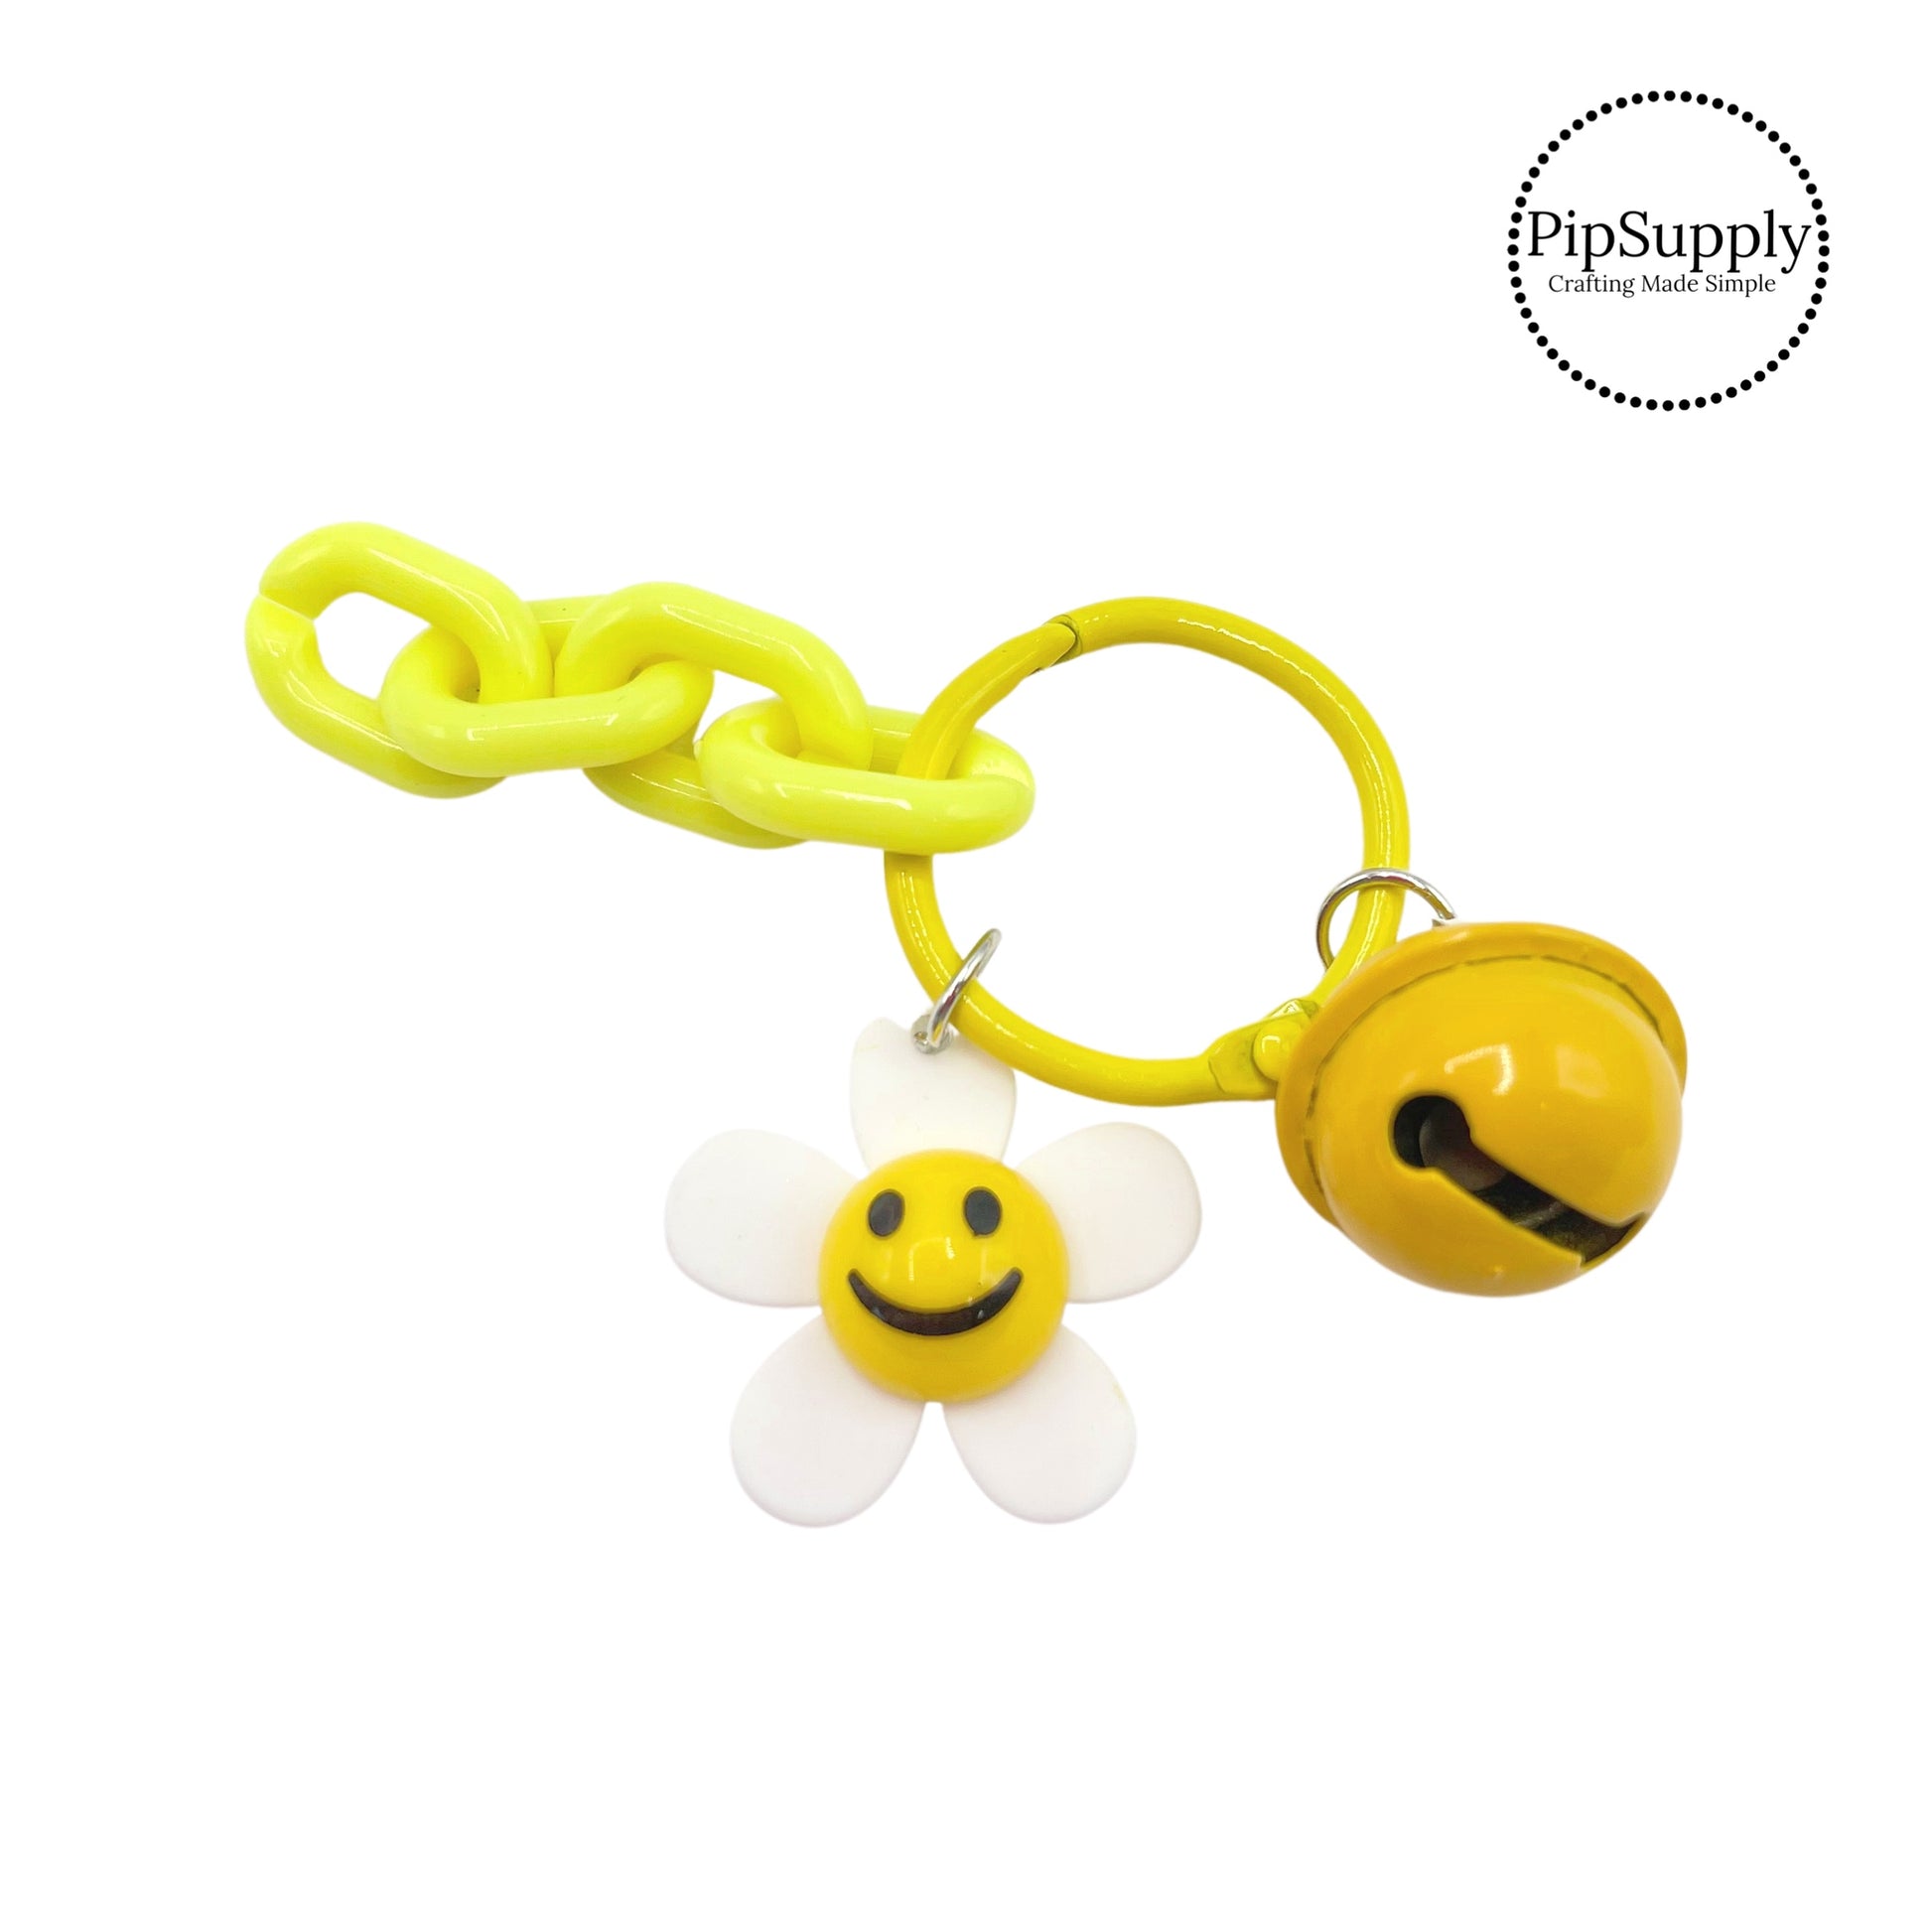 White flower with smiley face on yellow keychain 